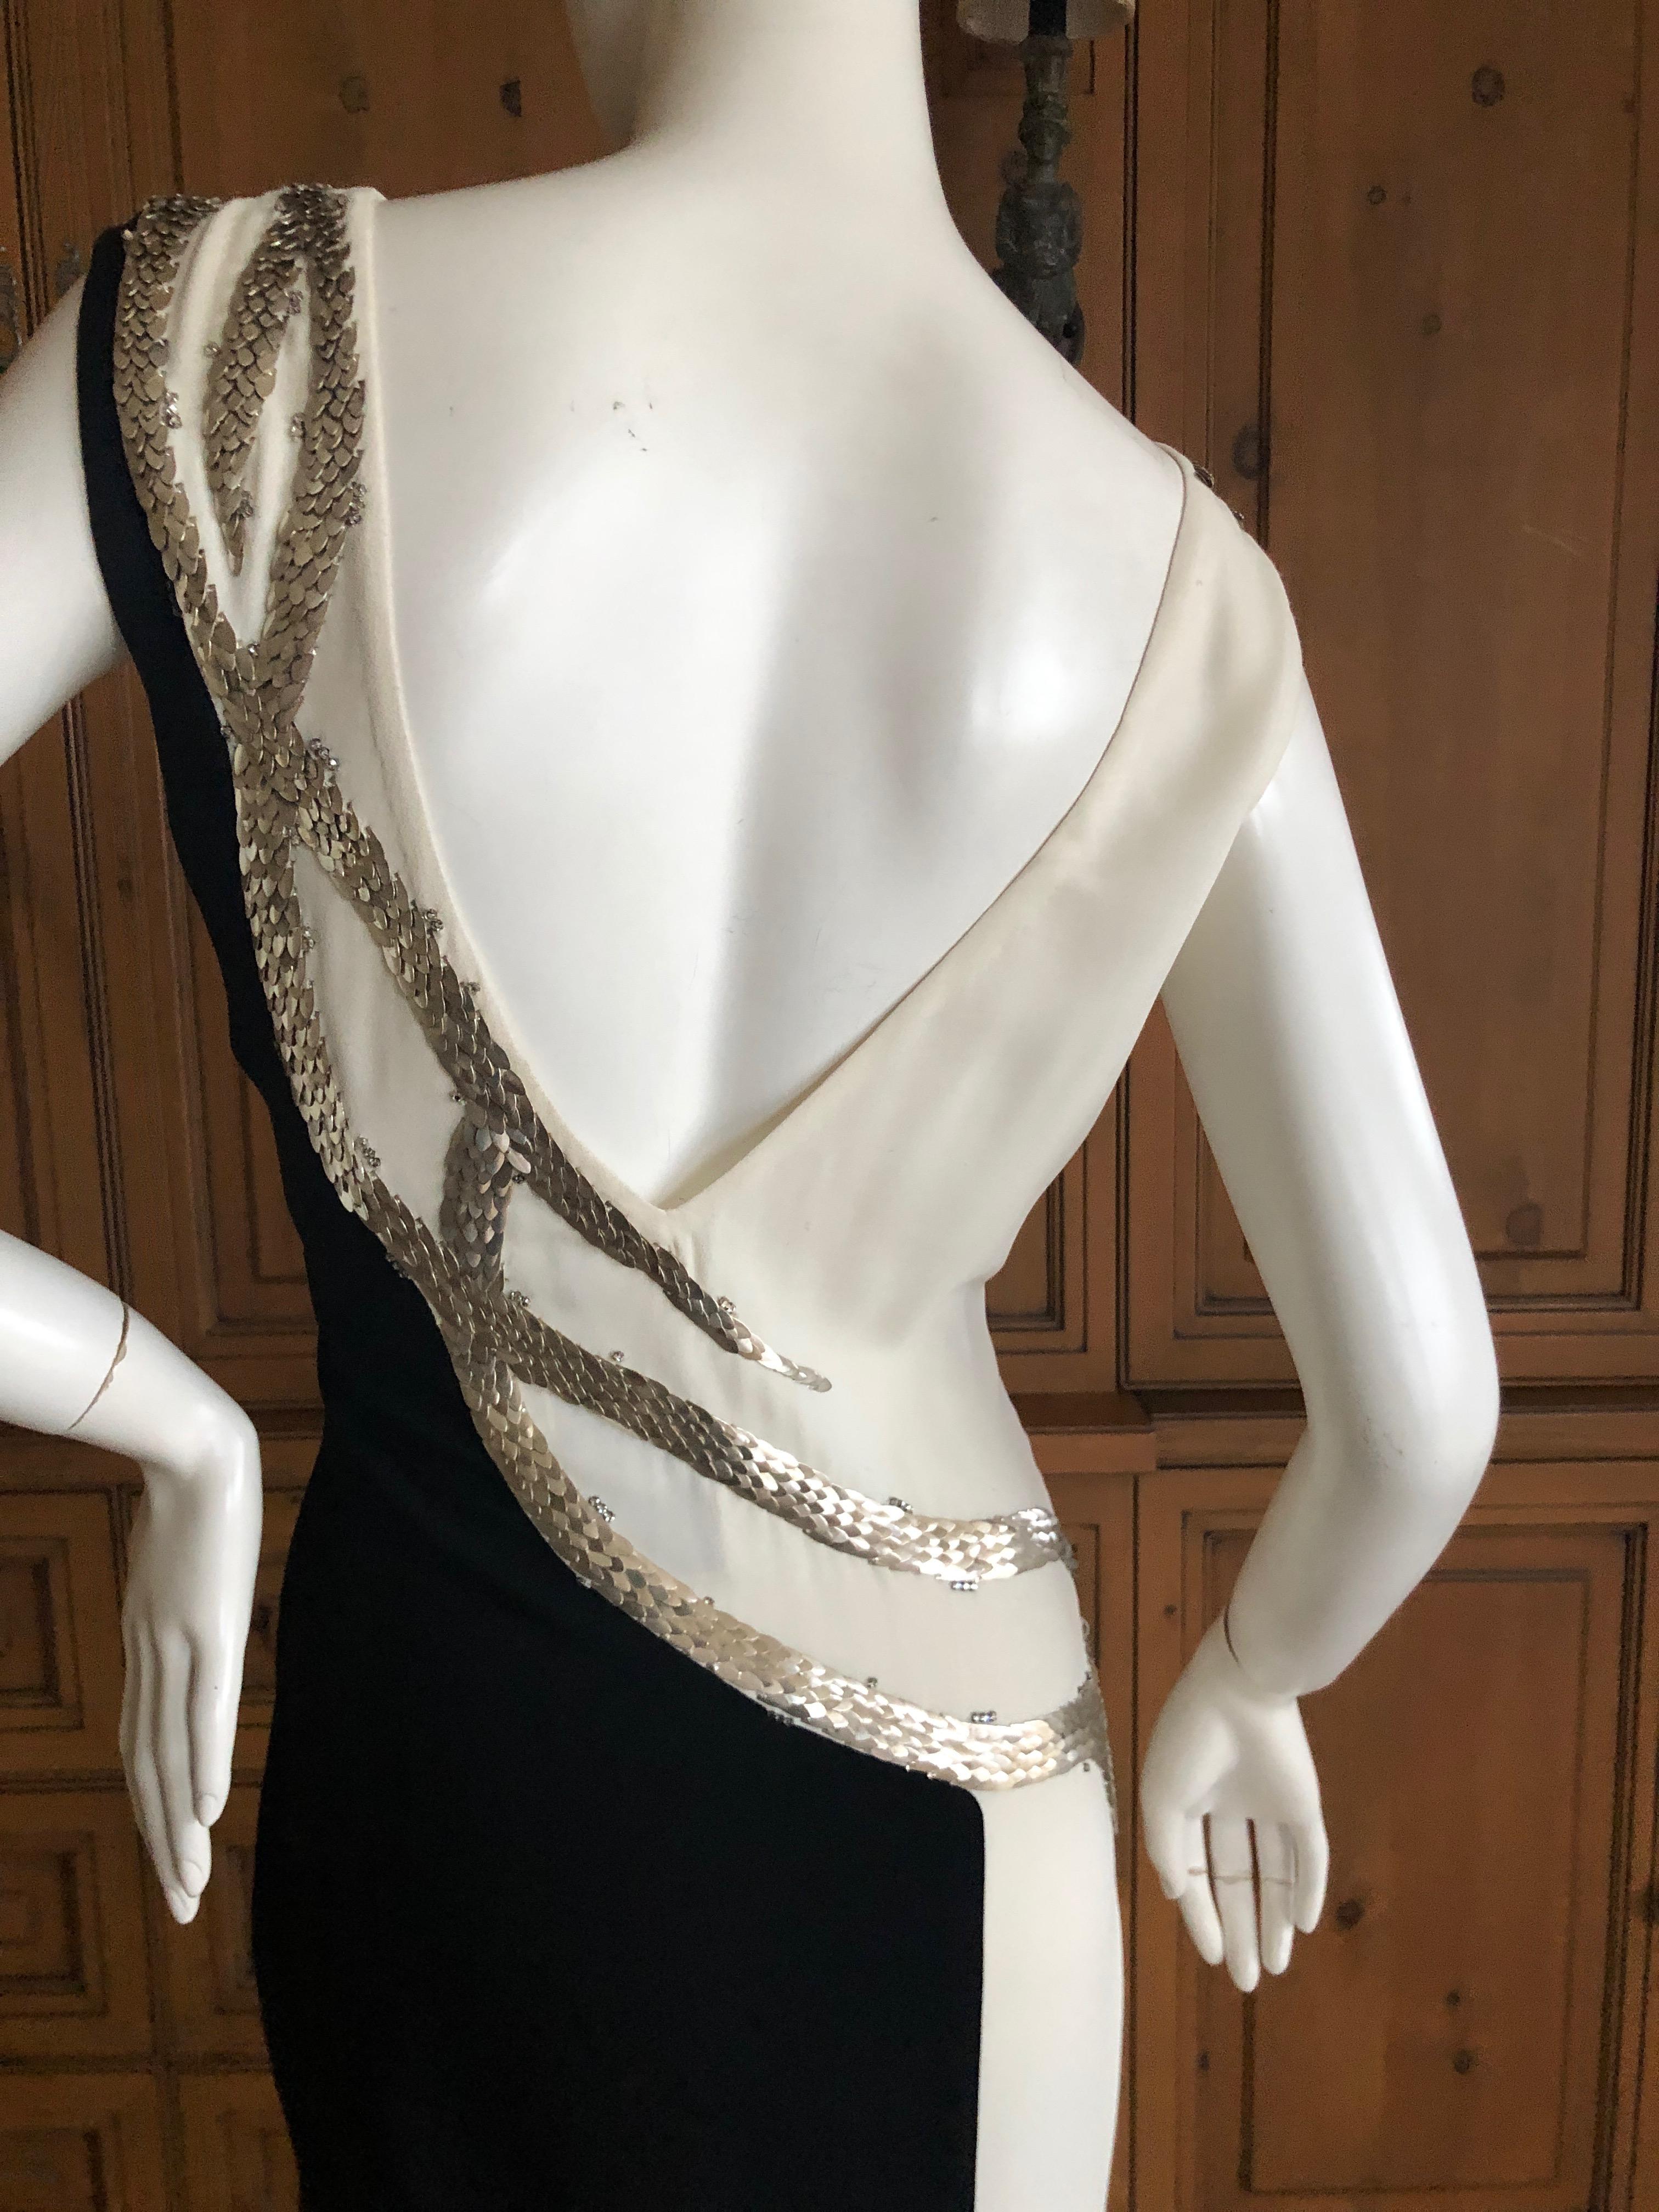 Oscar de la Renta Black and White Gown with Silver Snake Scale Sequin Details 8 For Sale 3